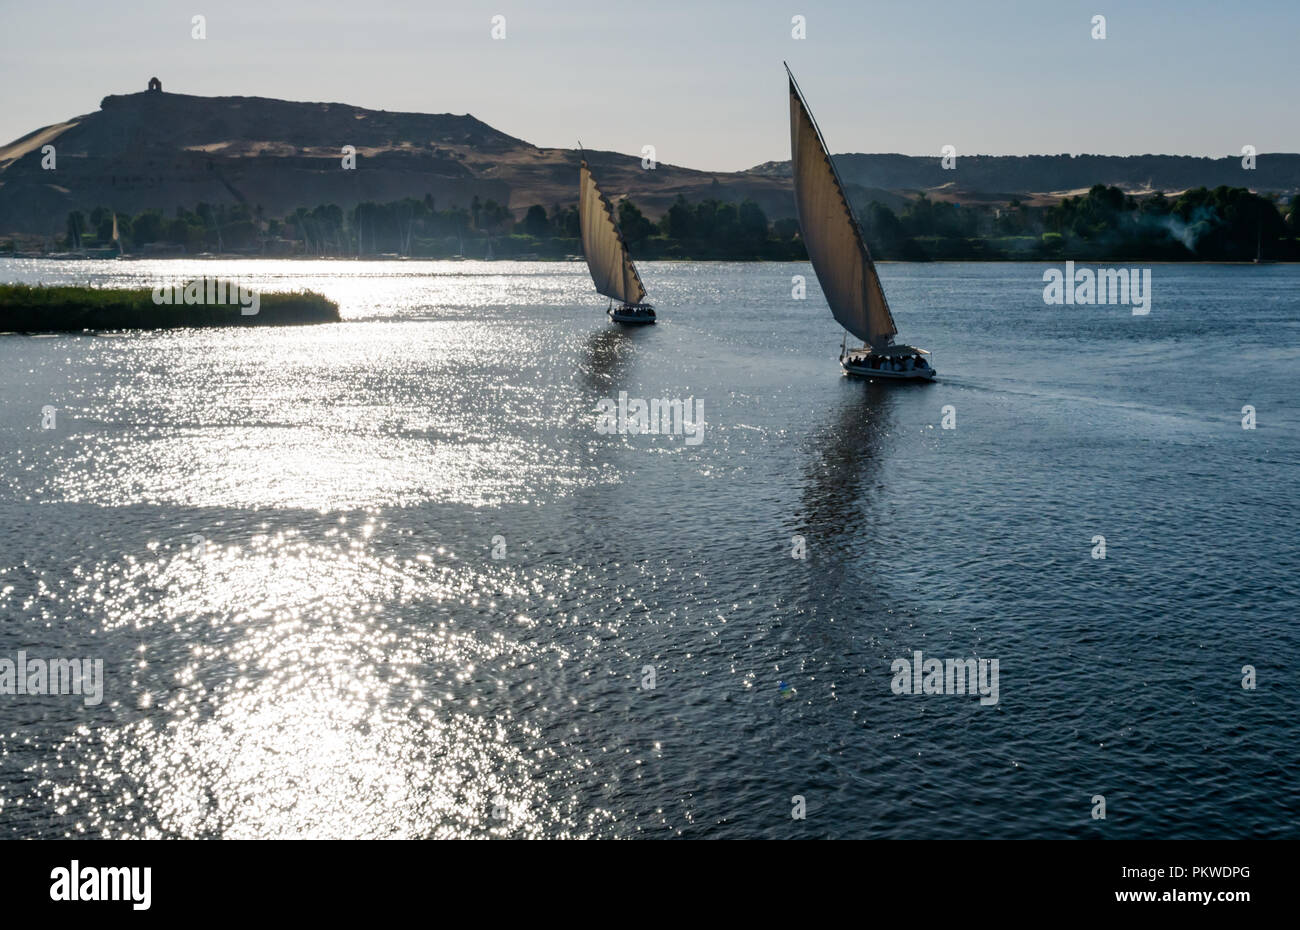 Silhouettes of traditional felucca sailing boats at sunset in River Nile with view across river to West riverbank, Aswan, Egypt, Africa Stock Photo